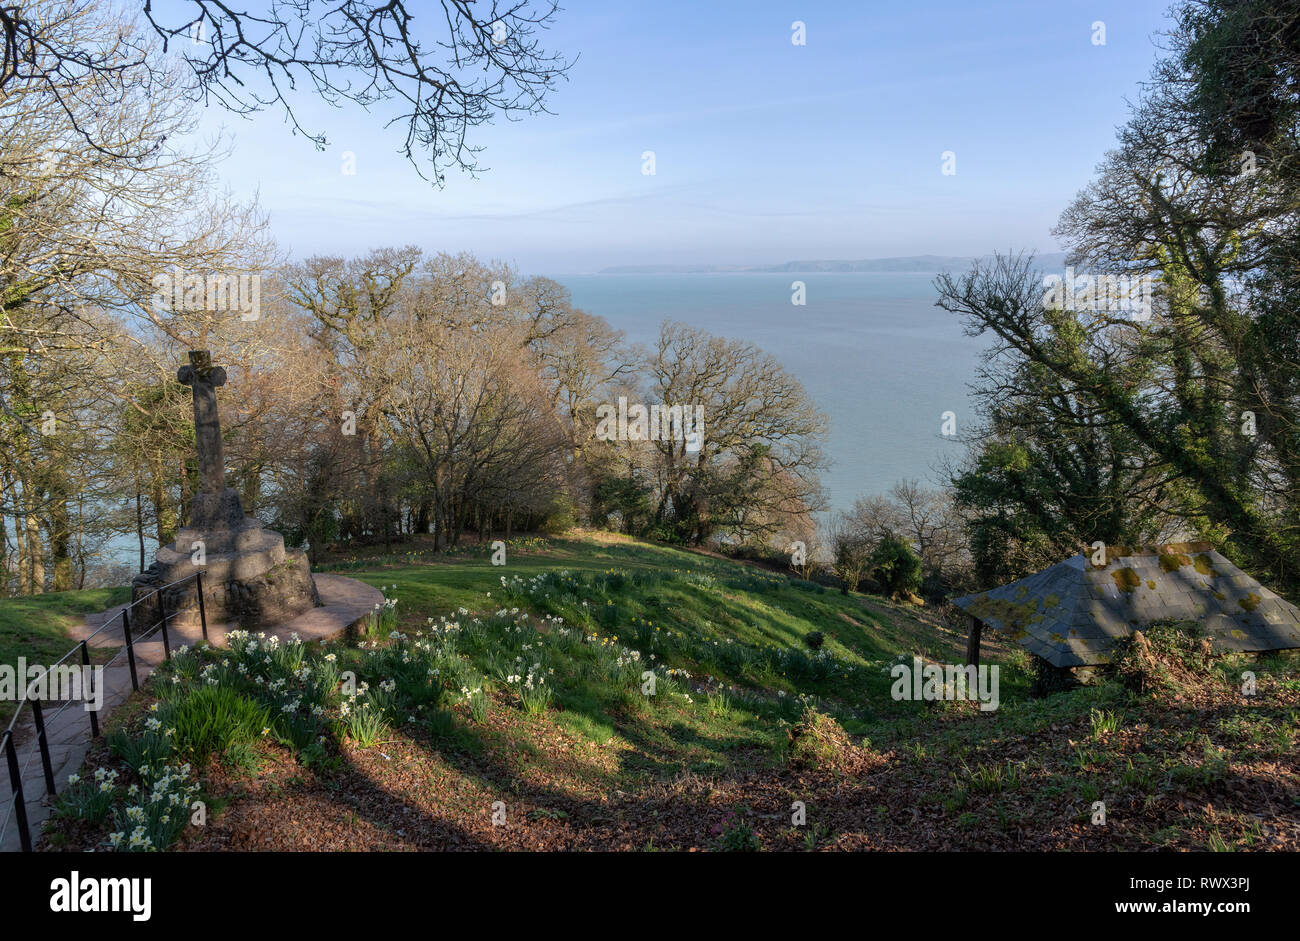 Clovelly, North Devon, England, UK. February 2019. A war memorial and Spring flowers at a picnic spot called Mount Pleasant with coastal views. Stock Photo